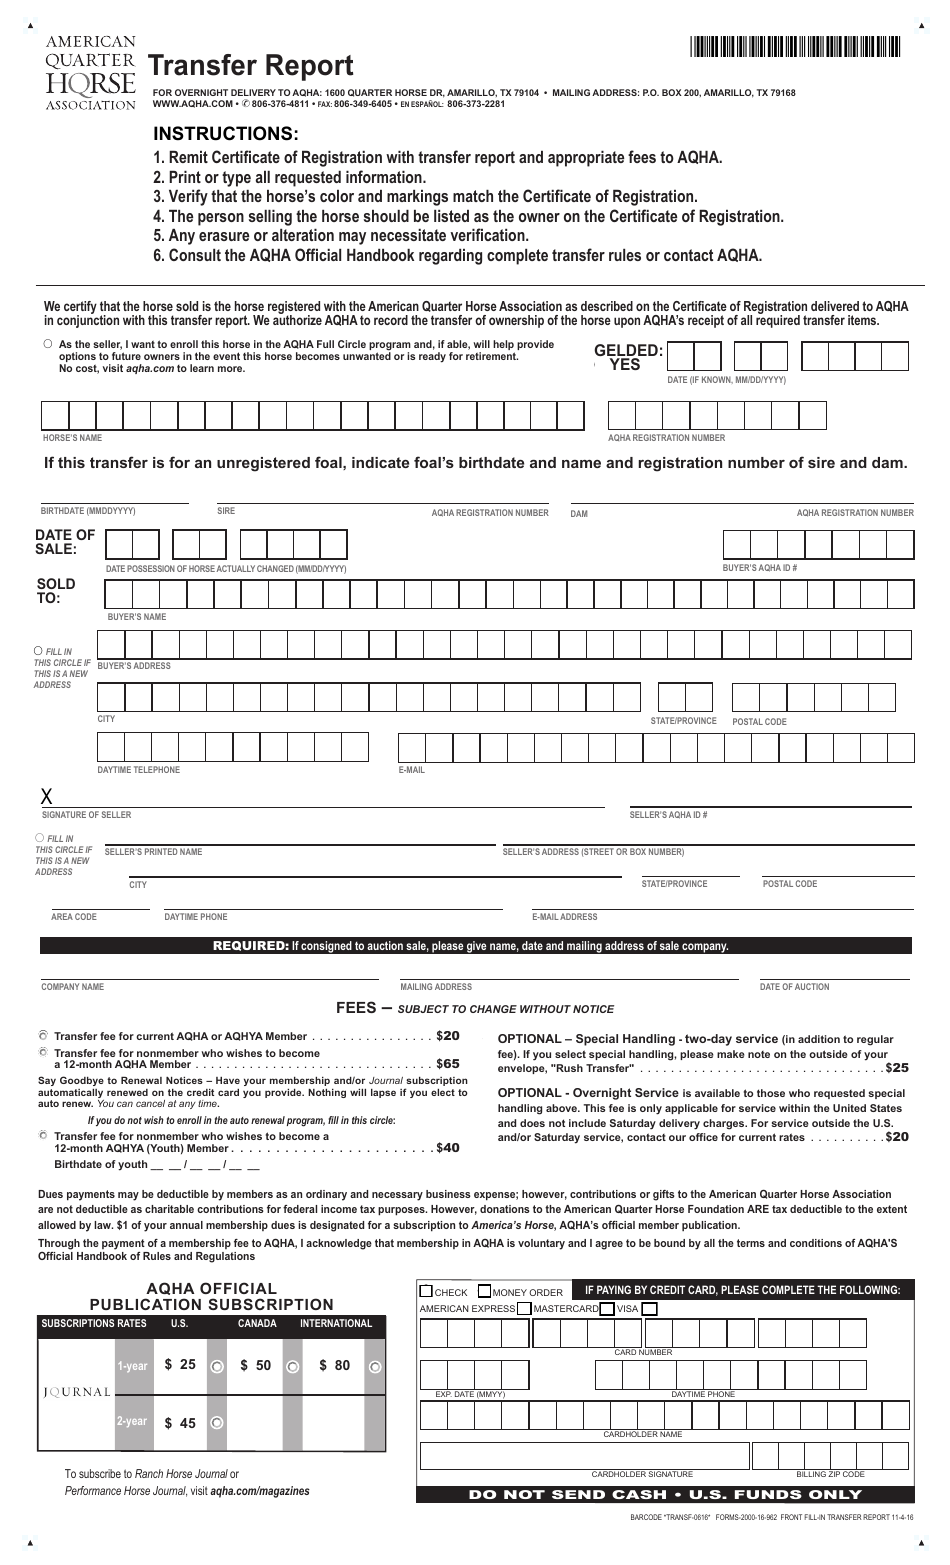 Transfer Report Form - Aqha - Fill Out, Sign Online and Download PDF ...